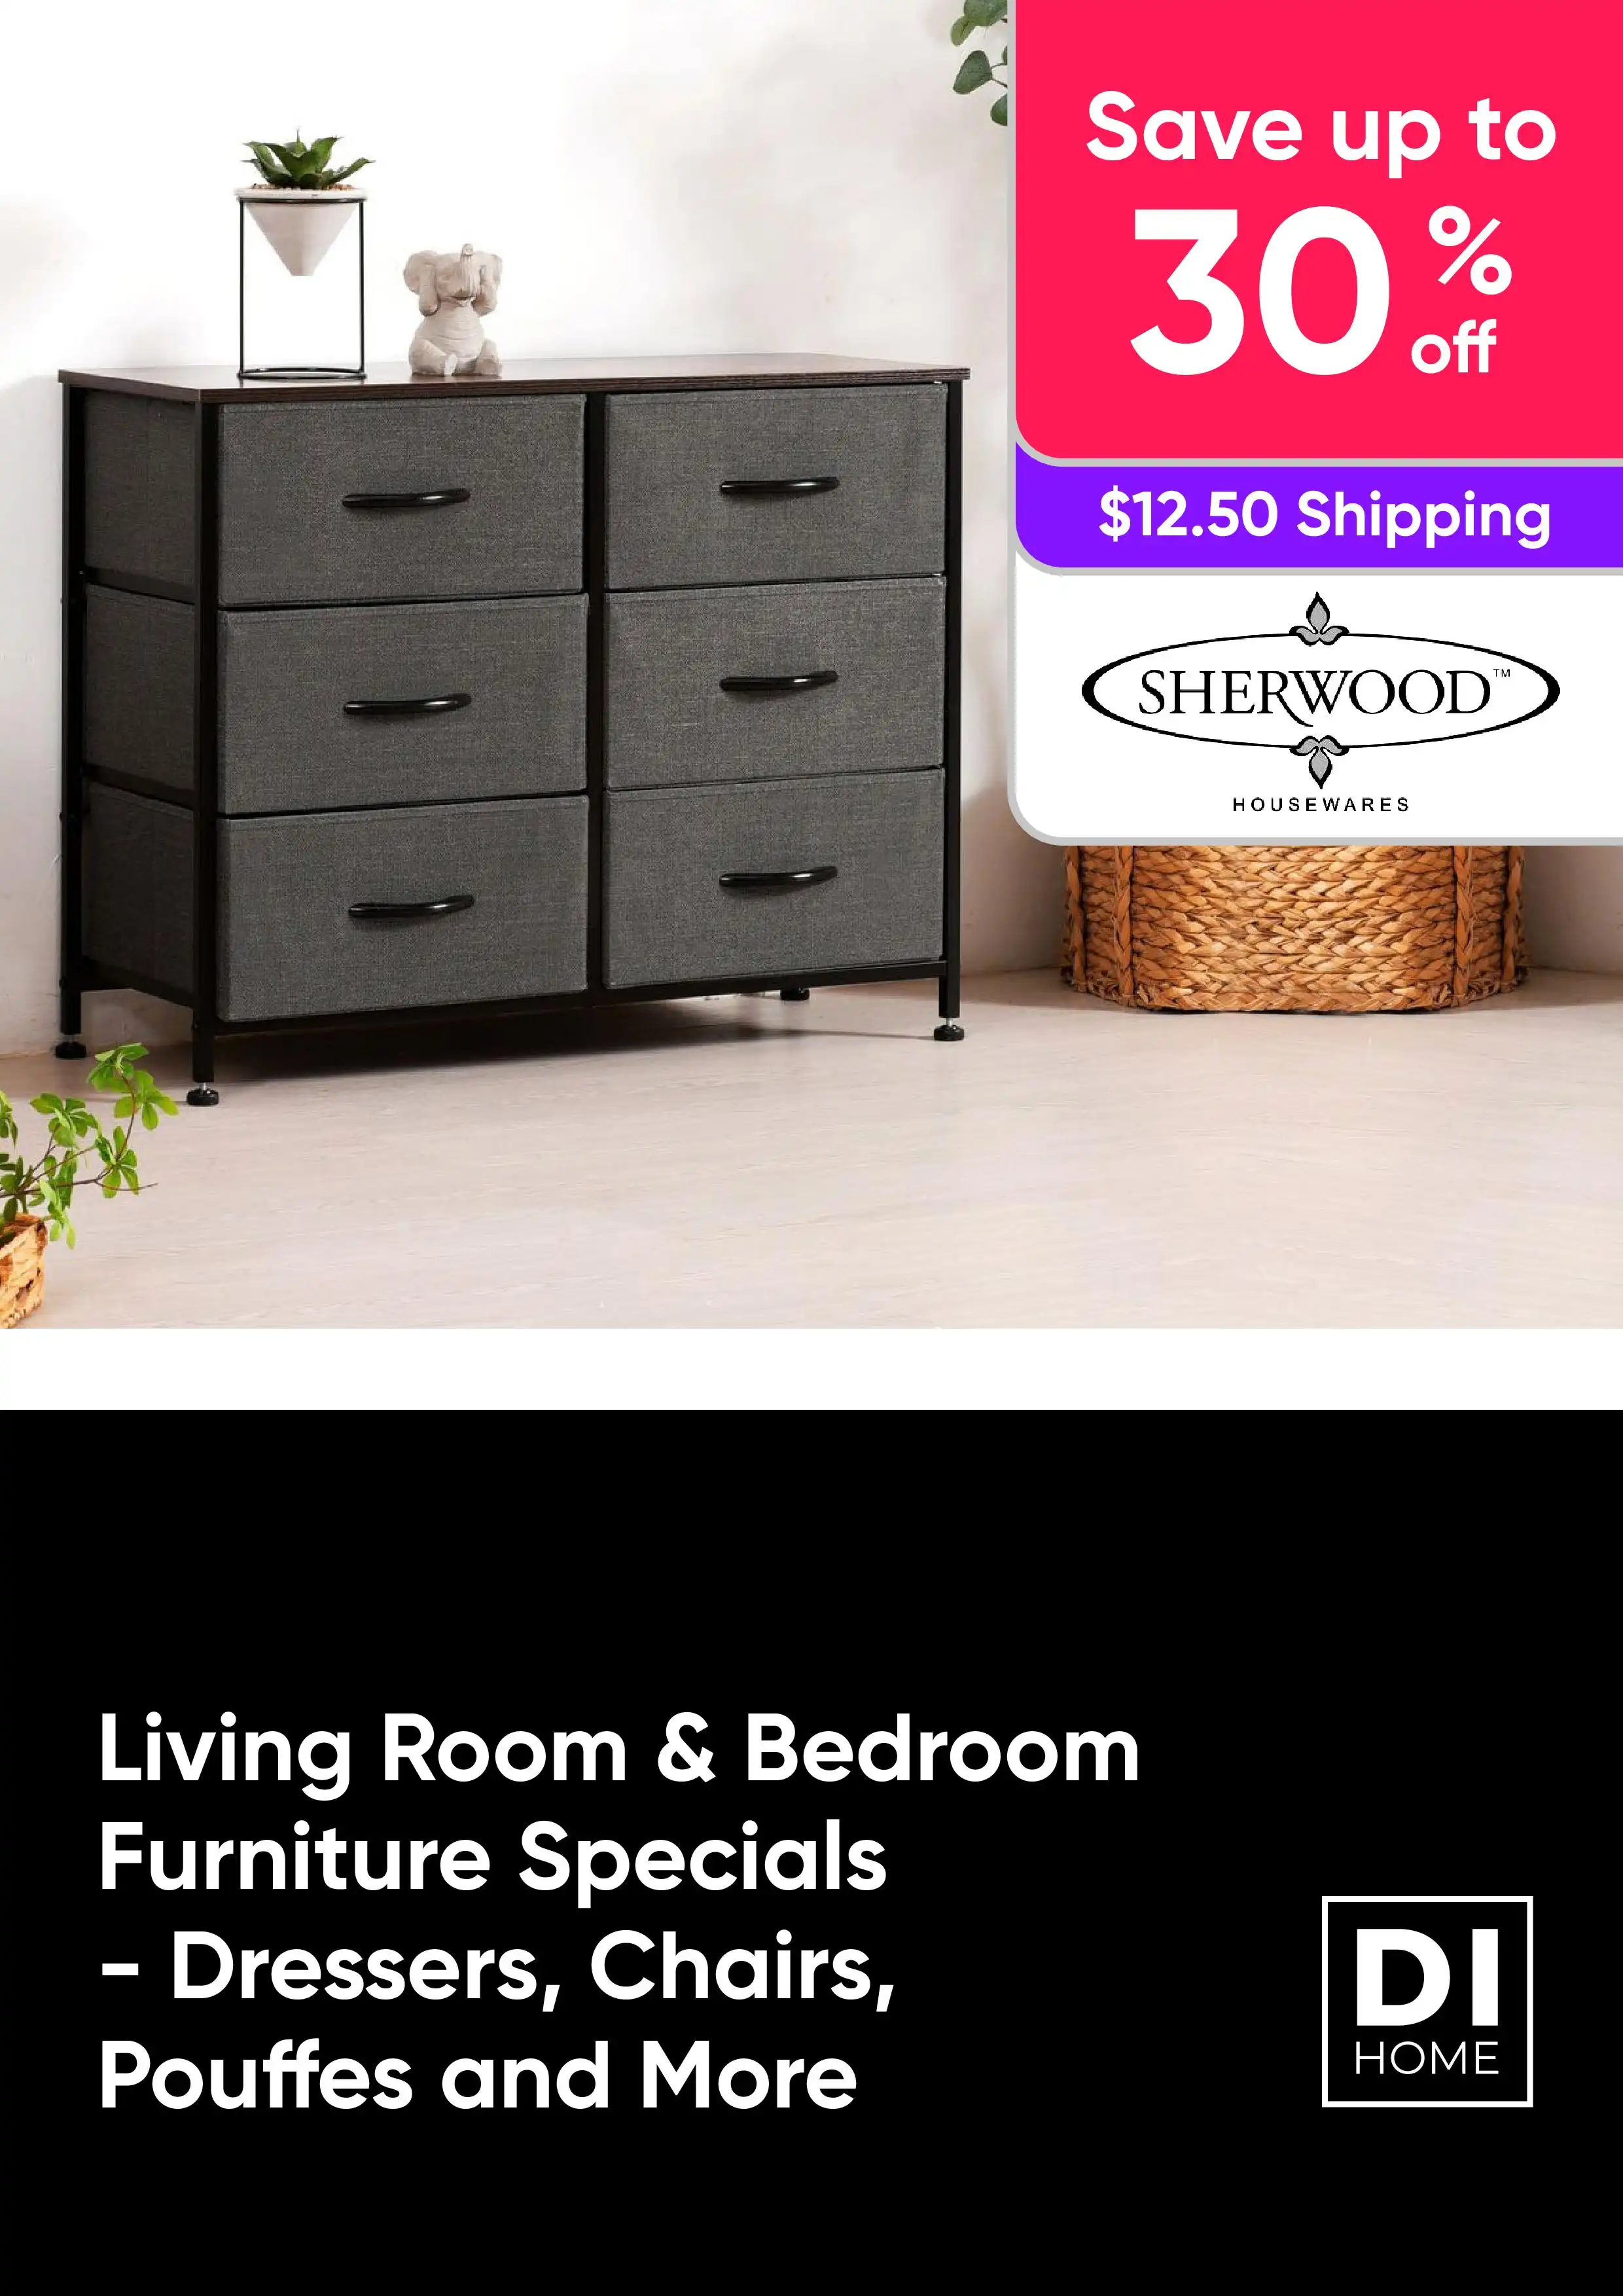 Living Room & Bedroom Furniture Specials - Dressers, Chairs, Pouffes and More - Save up to 30% off